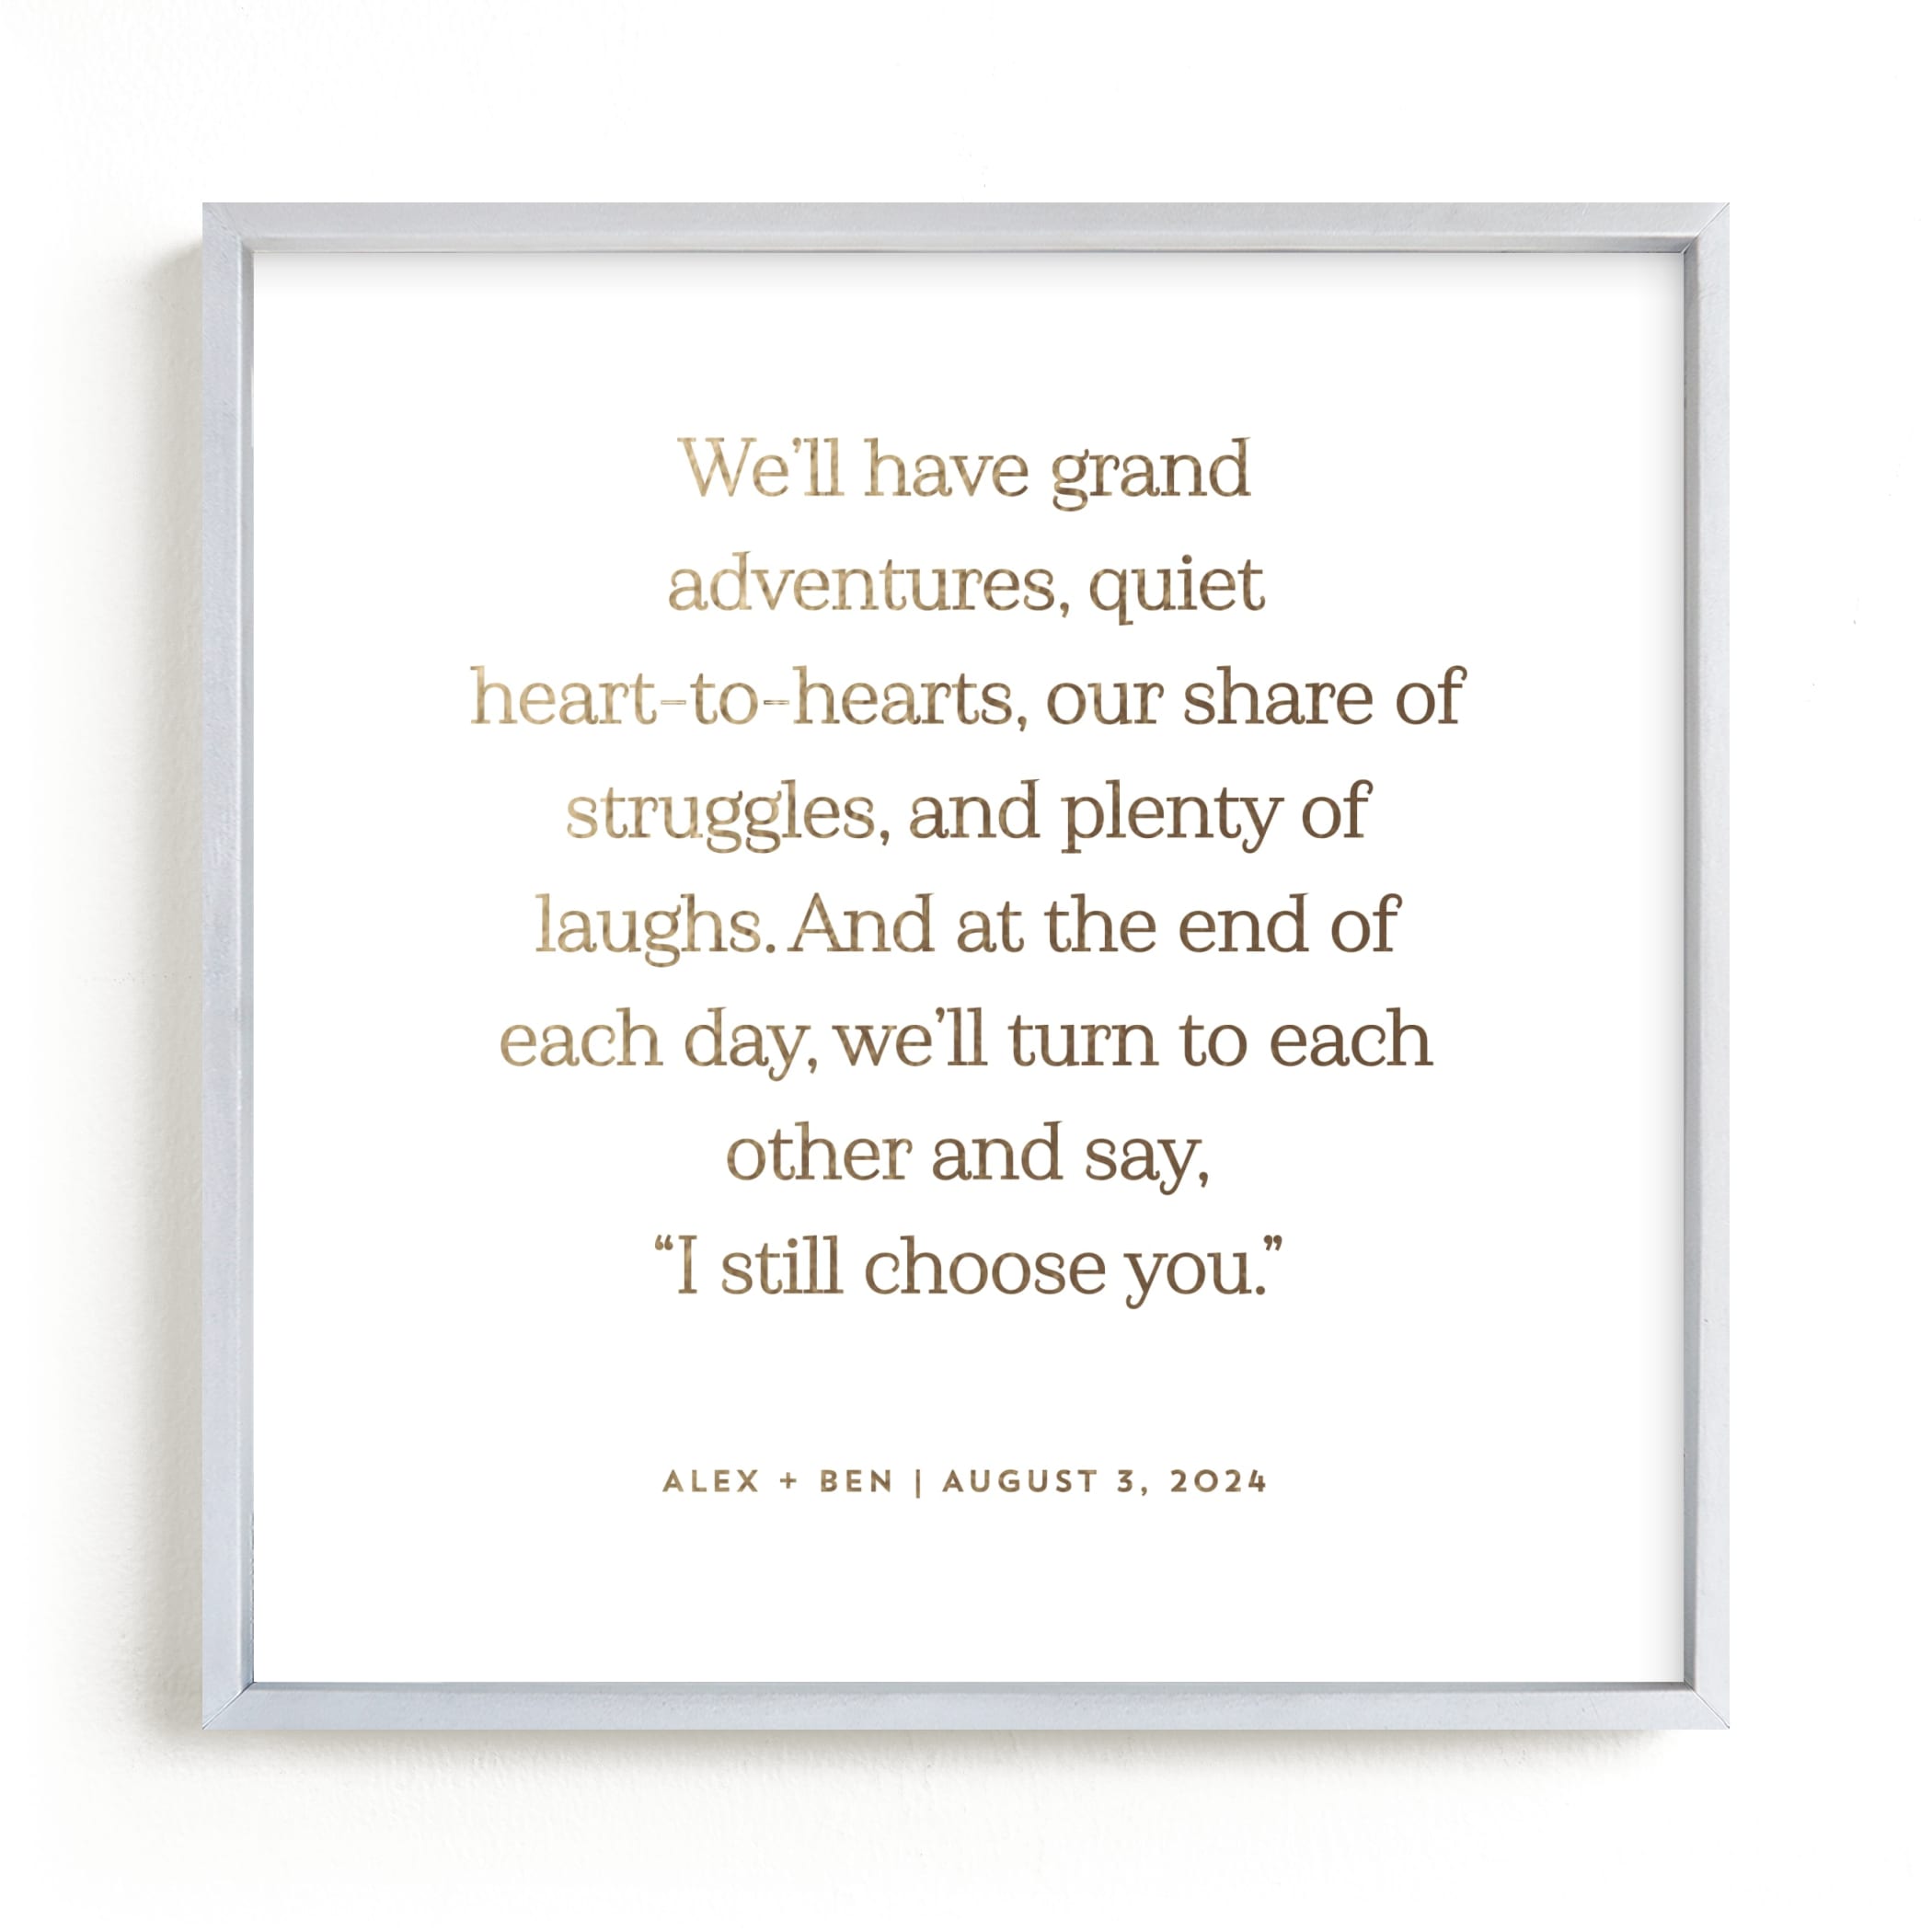 Your Vows as a Foil Art PrintbyMinted